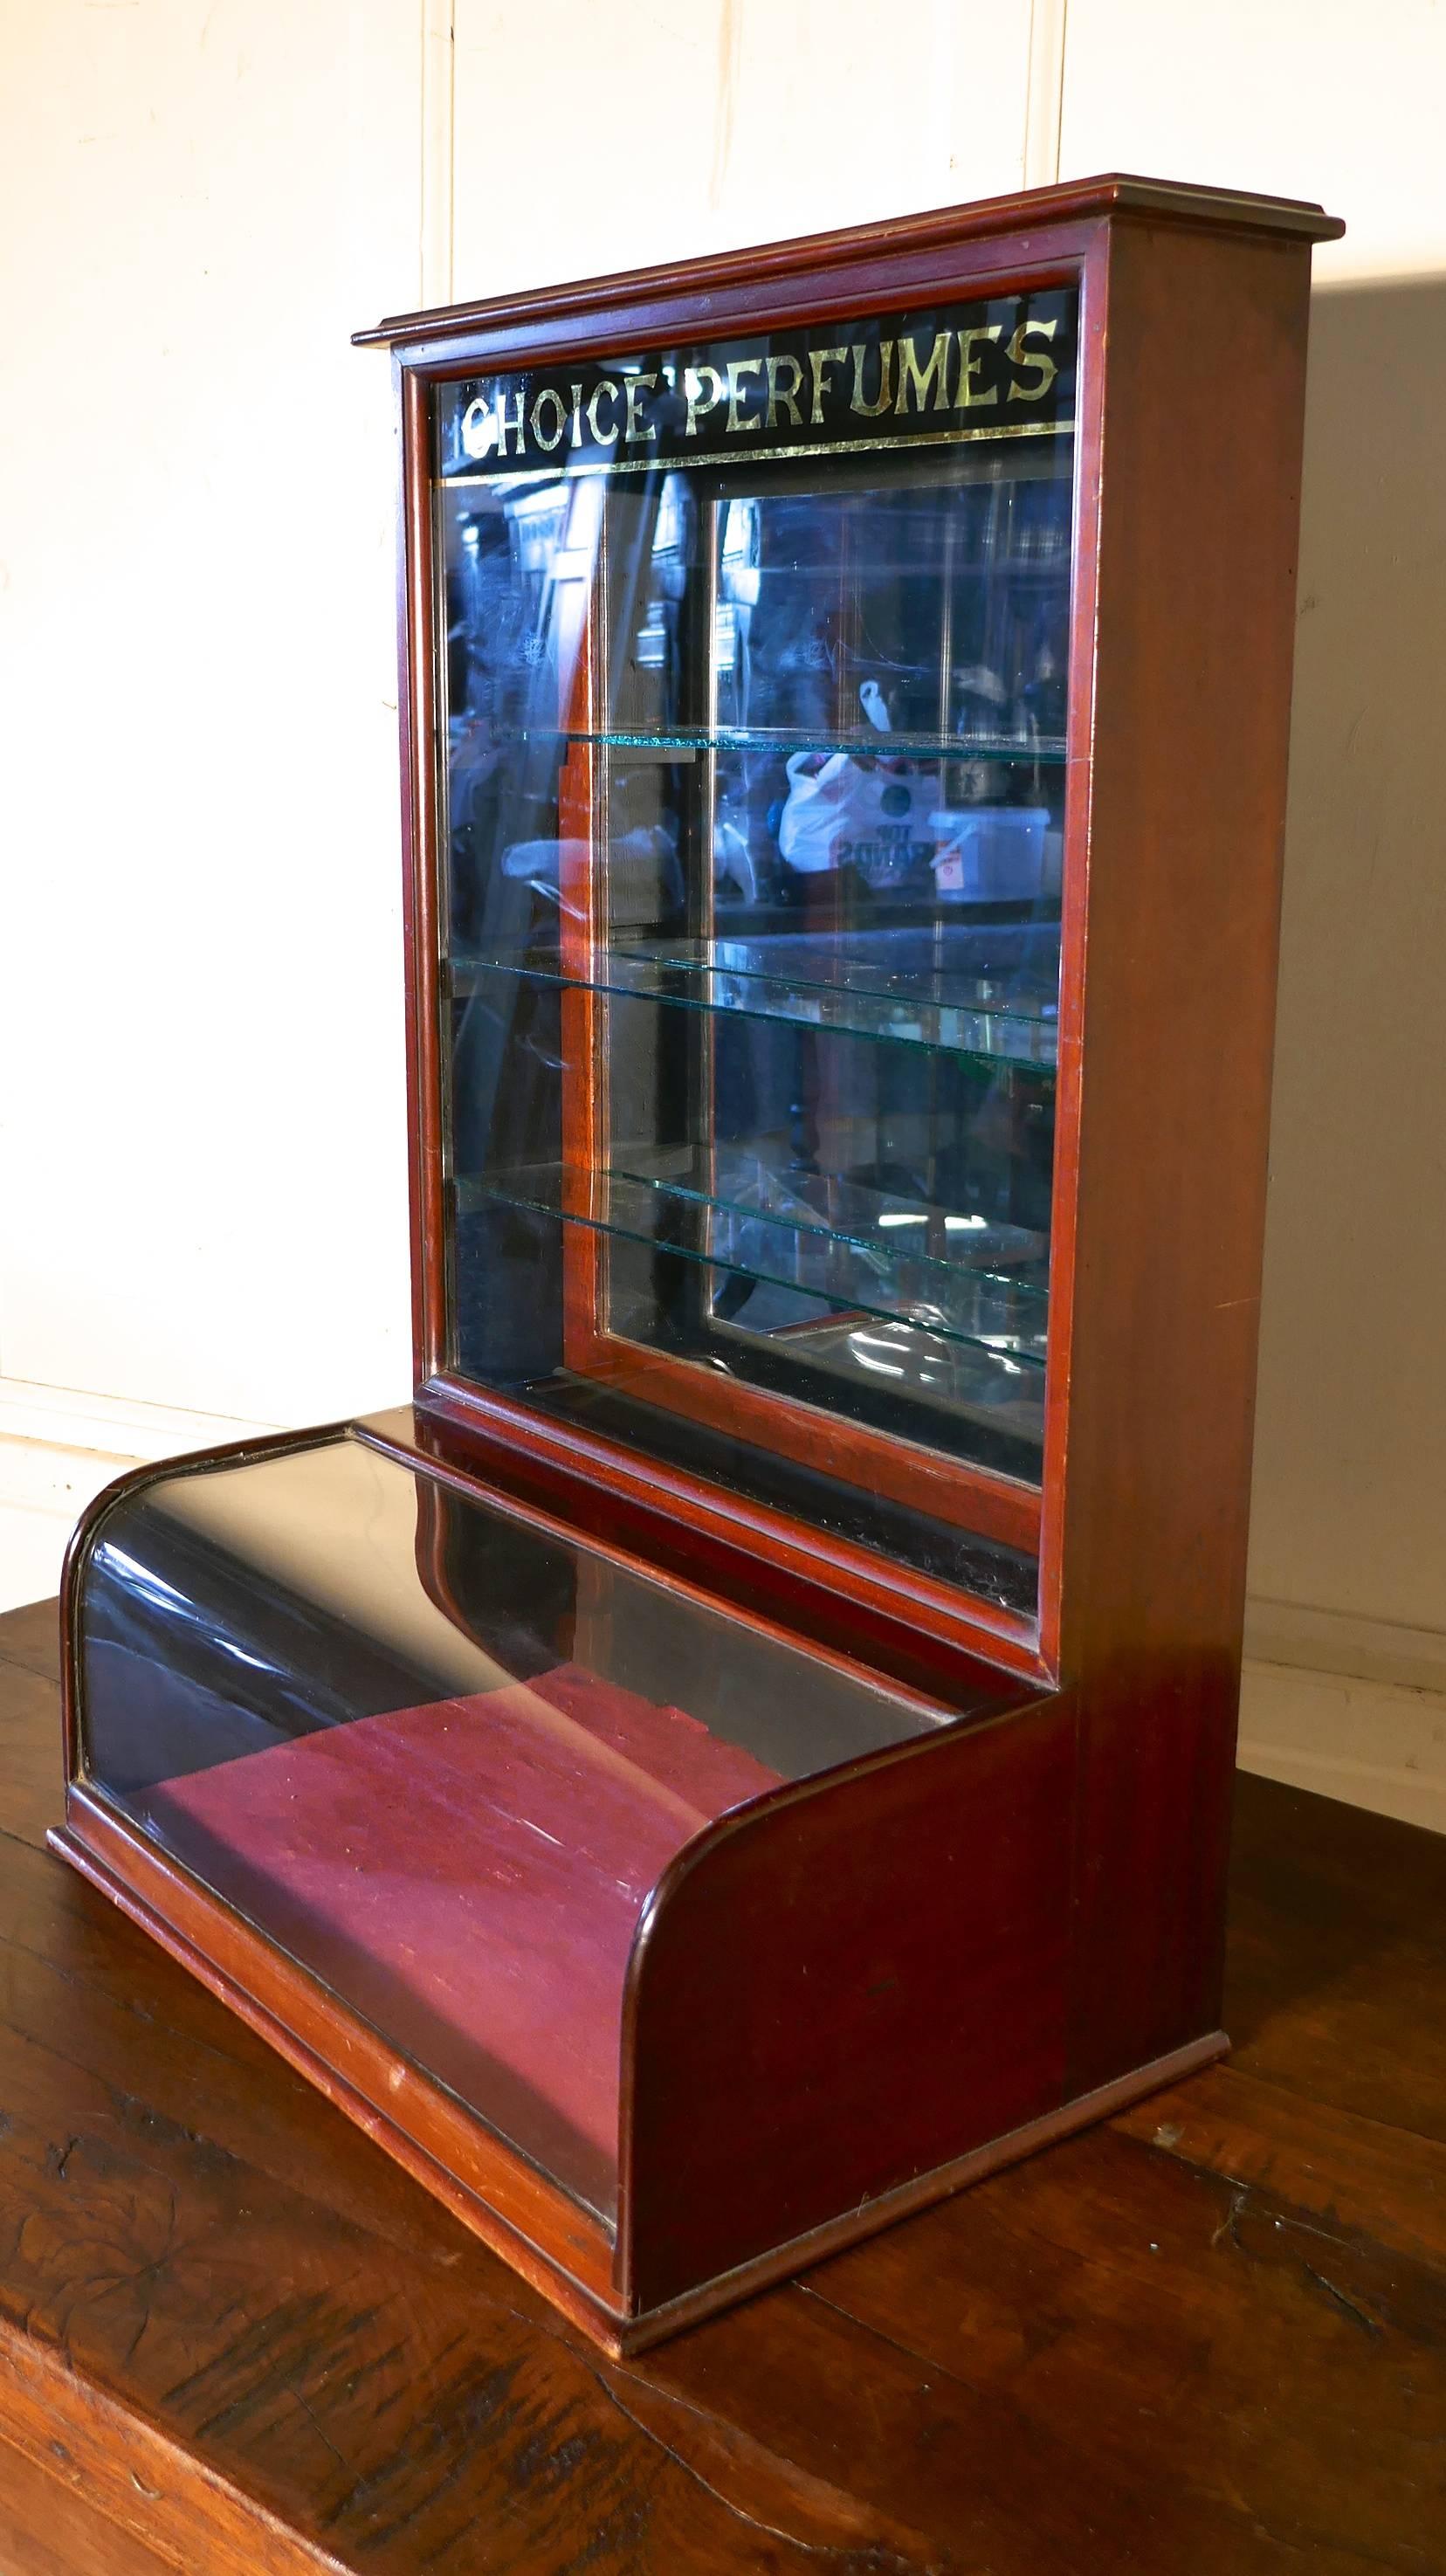 Victorian mahogany chemist’s perfume shop display cabinet

This charming Victorian mahogany shop display cabinet is made in plate glass and mahogany, the top of the cabinet is decorated with a lovely old fashioned black and gold mirrored sign,